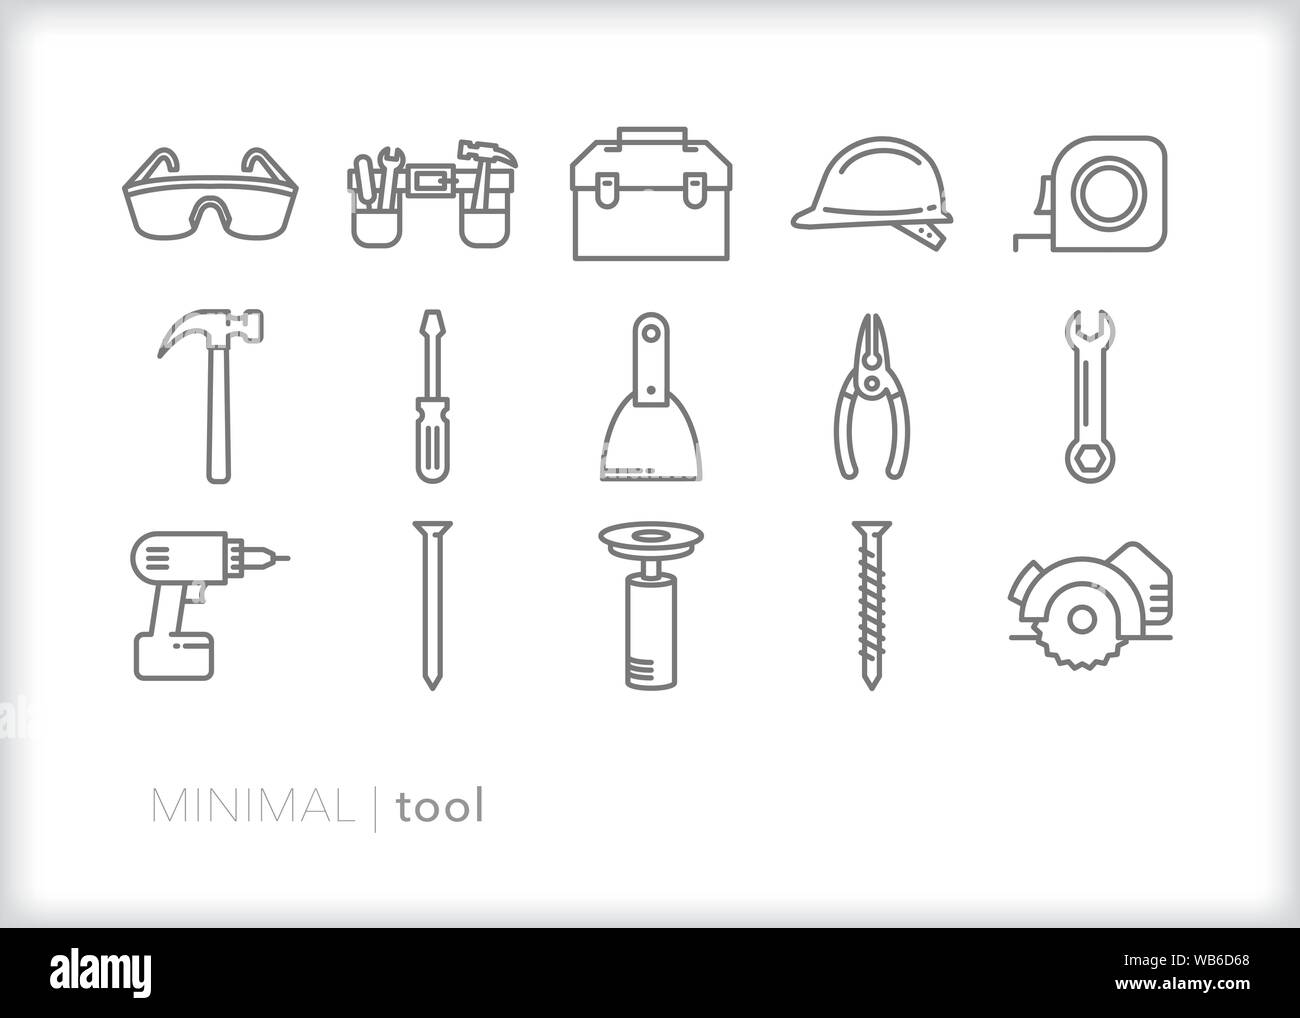 Set of 15 tool line icons for working in a wood workshop, construction industry or carpentry Stock Vector